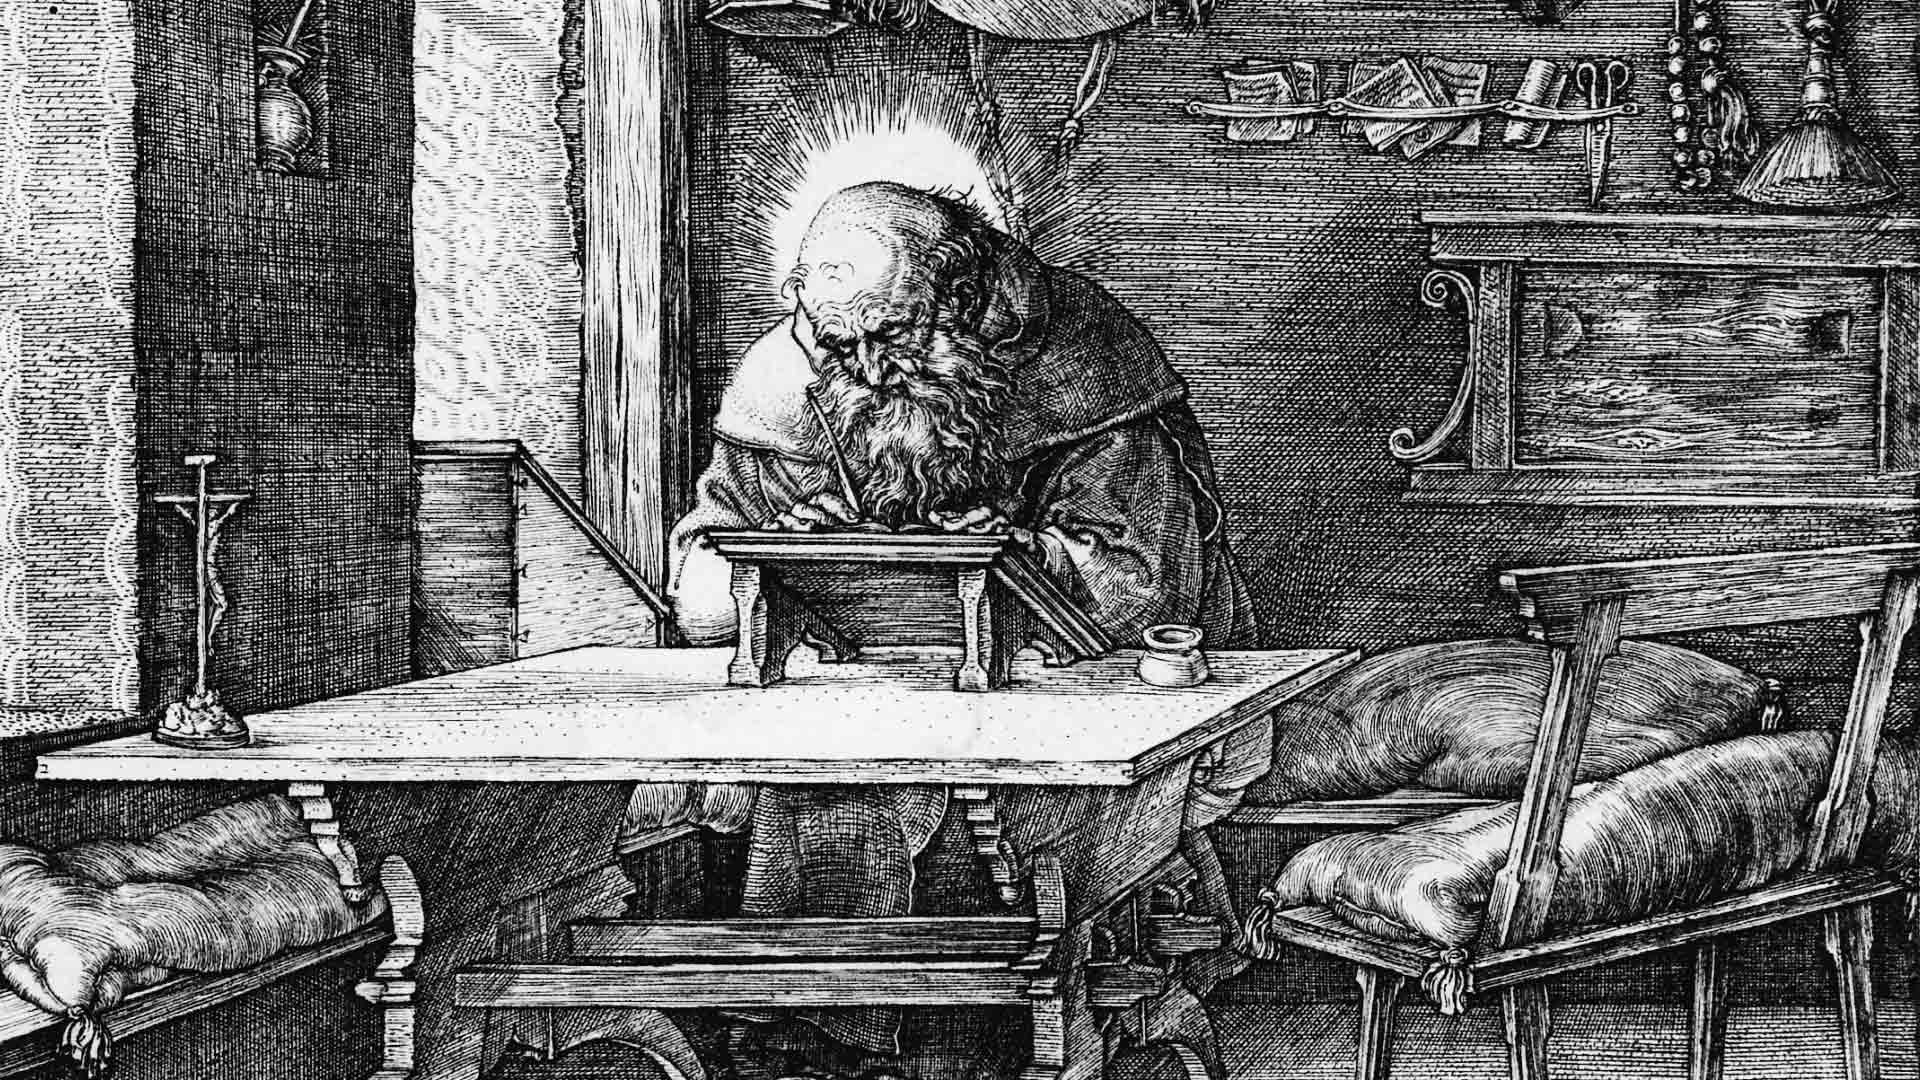 Saint Jerome in His Study, engraving detail, c.1514, by Albrecht Durer, at the Metropolitan Museum of Art, New York, USA. (CC0 1.0)